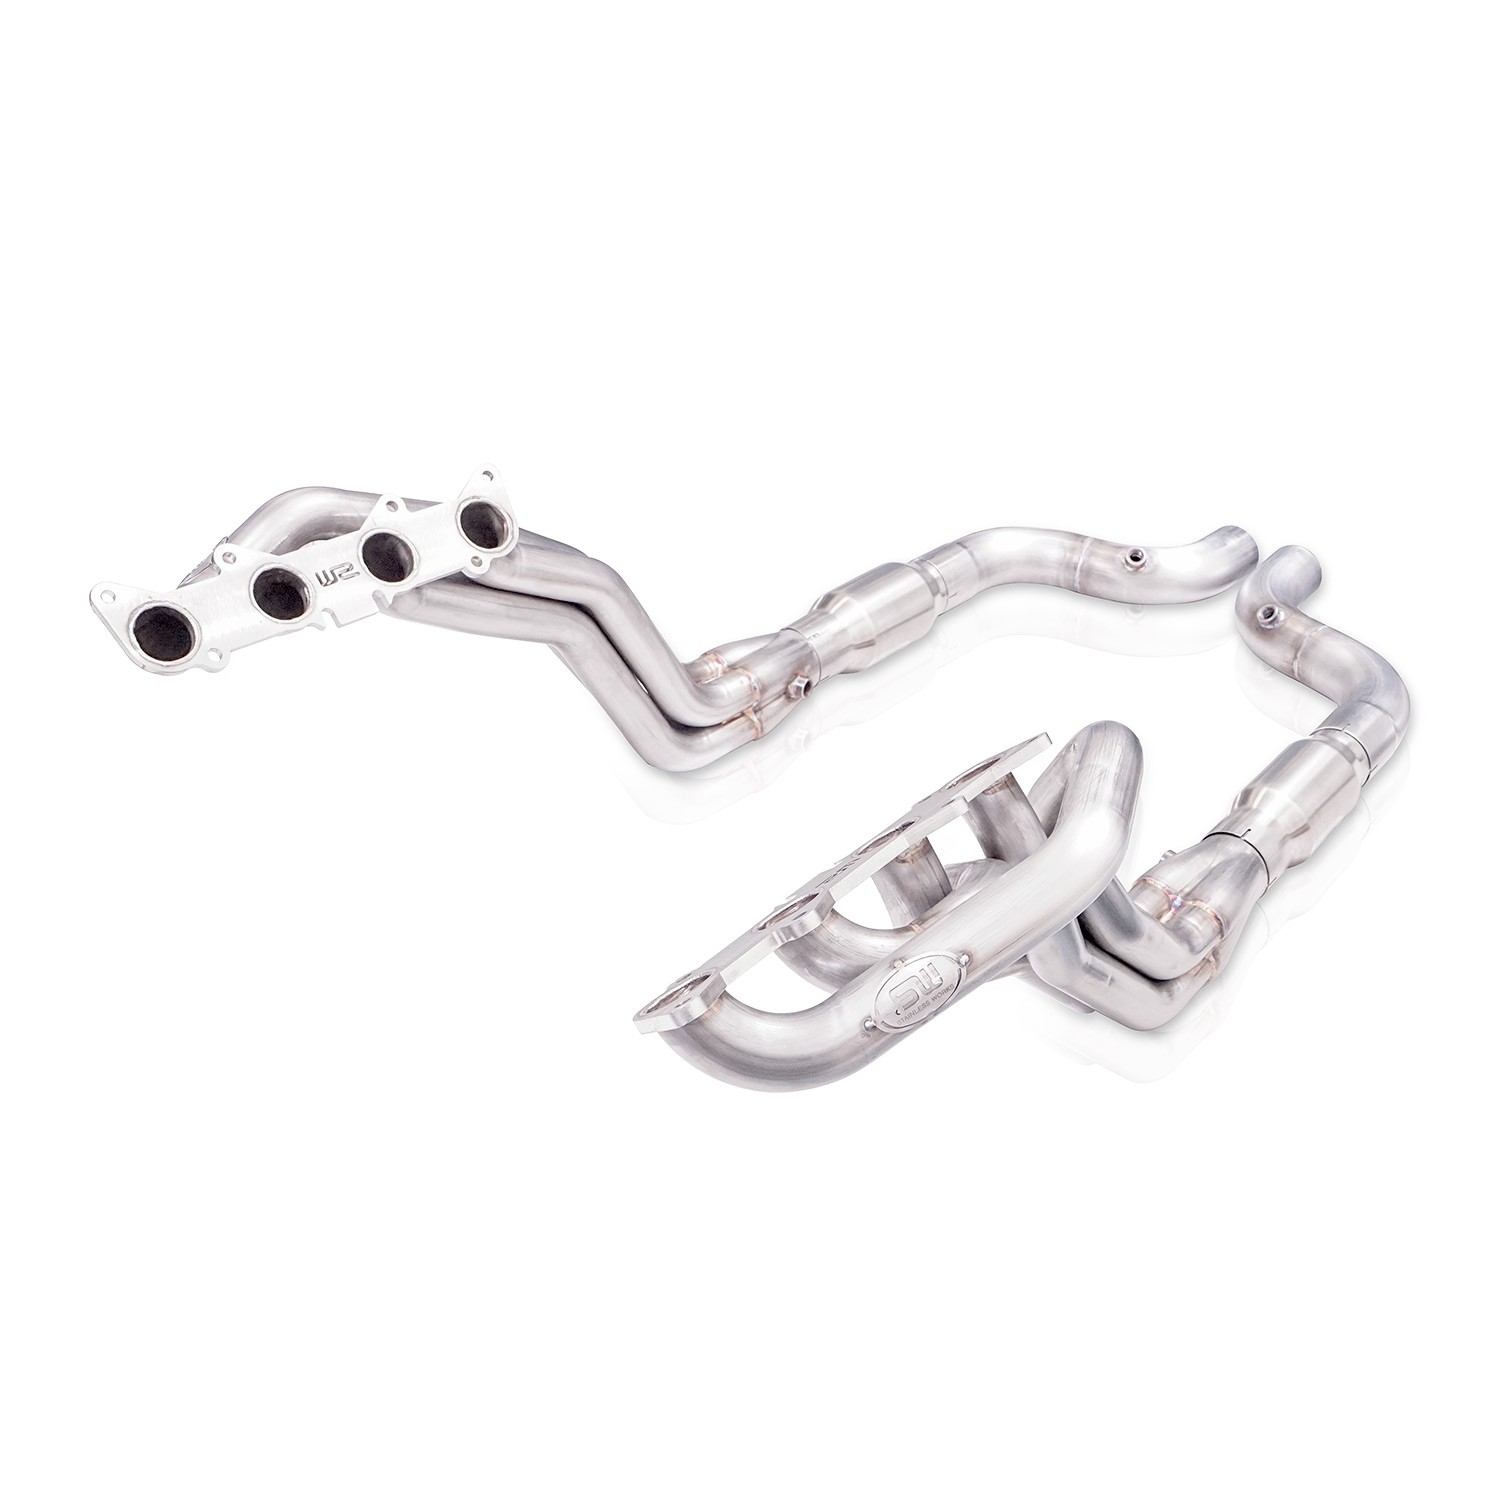 2015+ Ford Mustang Shelby GT350 Stainless Works 1 7/8" Long Tube Headers High-Flow Cats Performance Connect